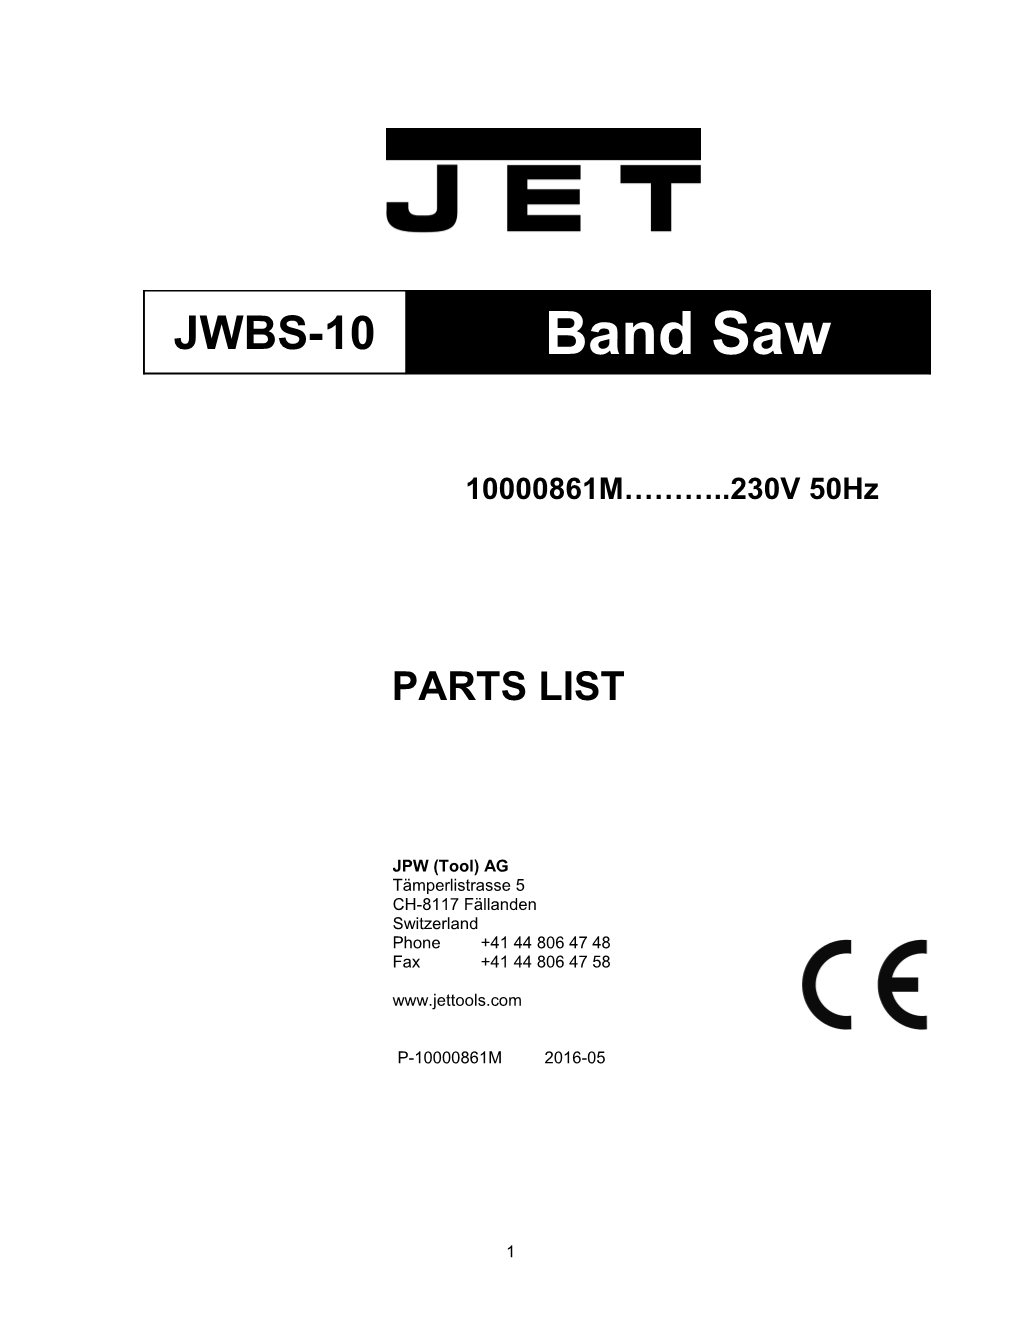 Exploded View for JWBS-10Band Saw